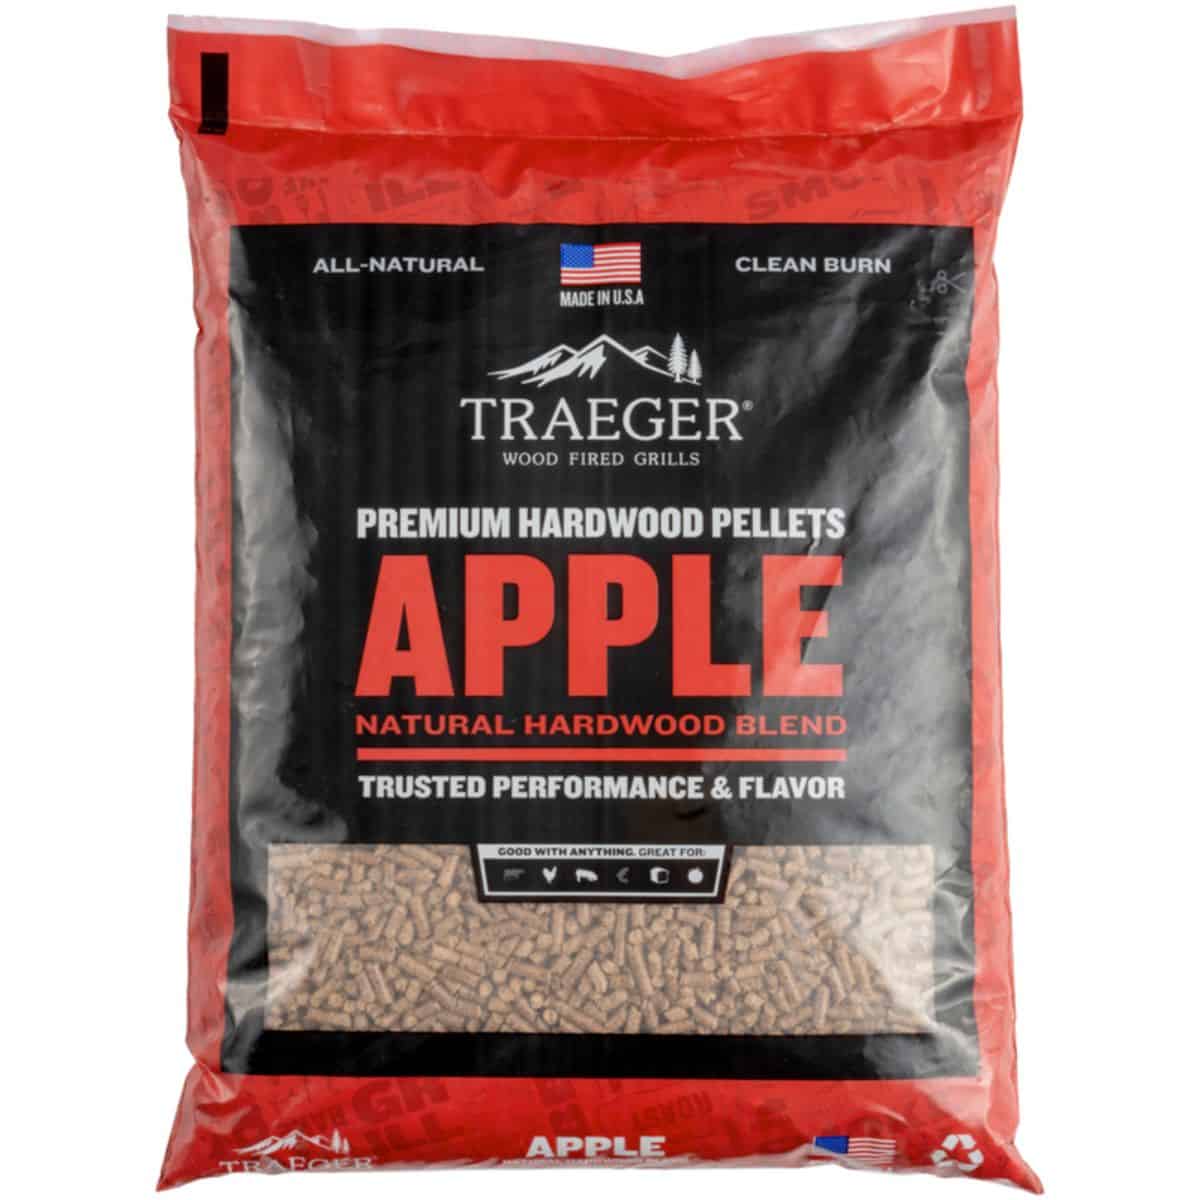 A red bag of apple traeger wood pellets on a white background.